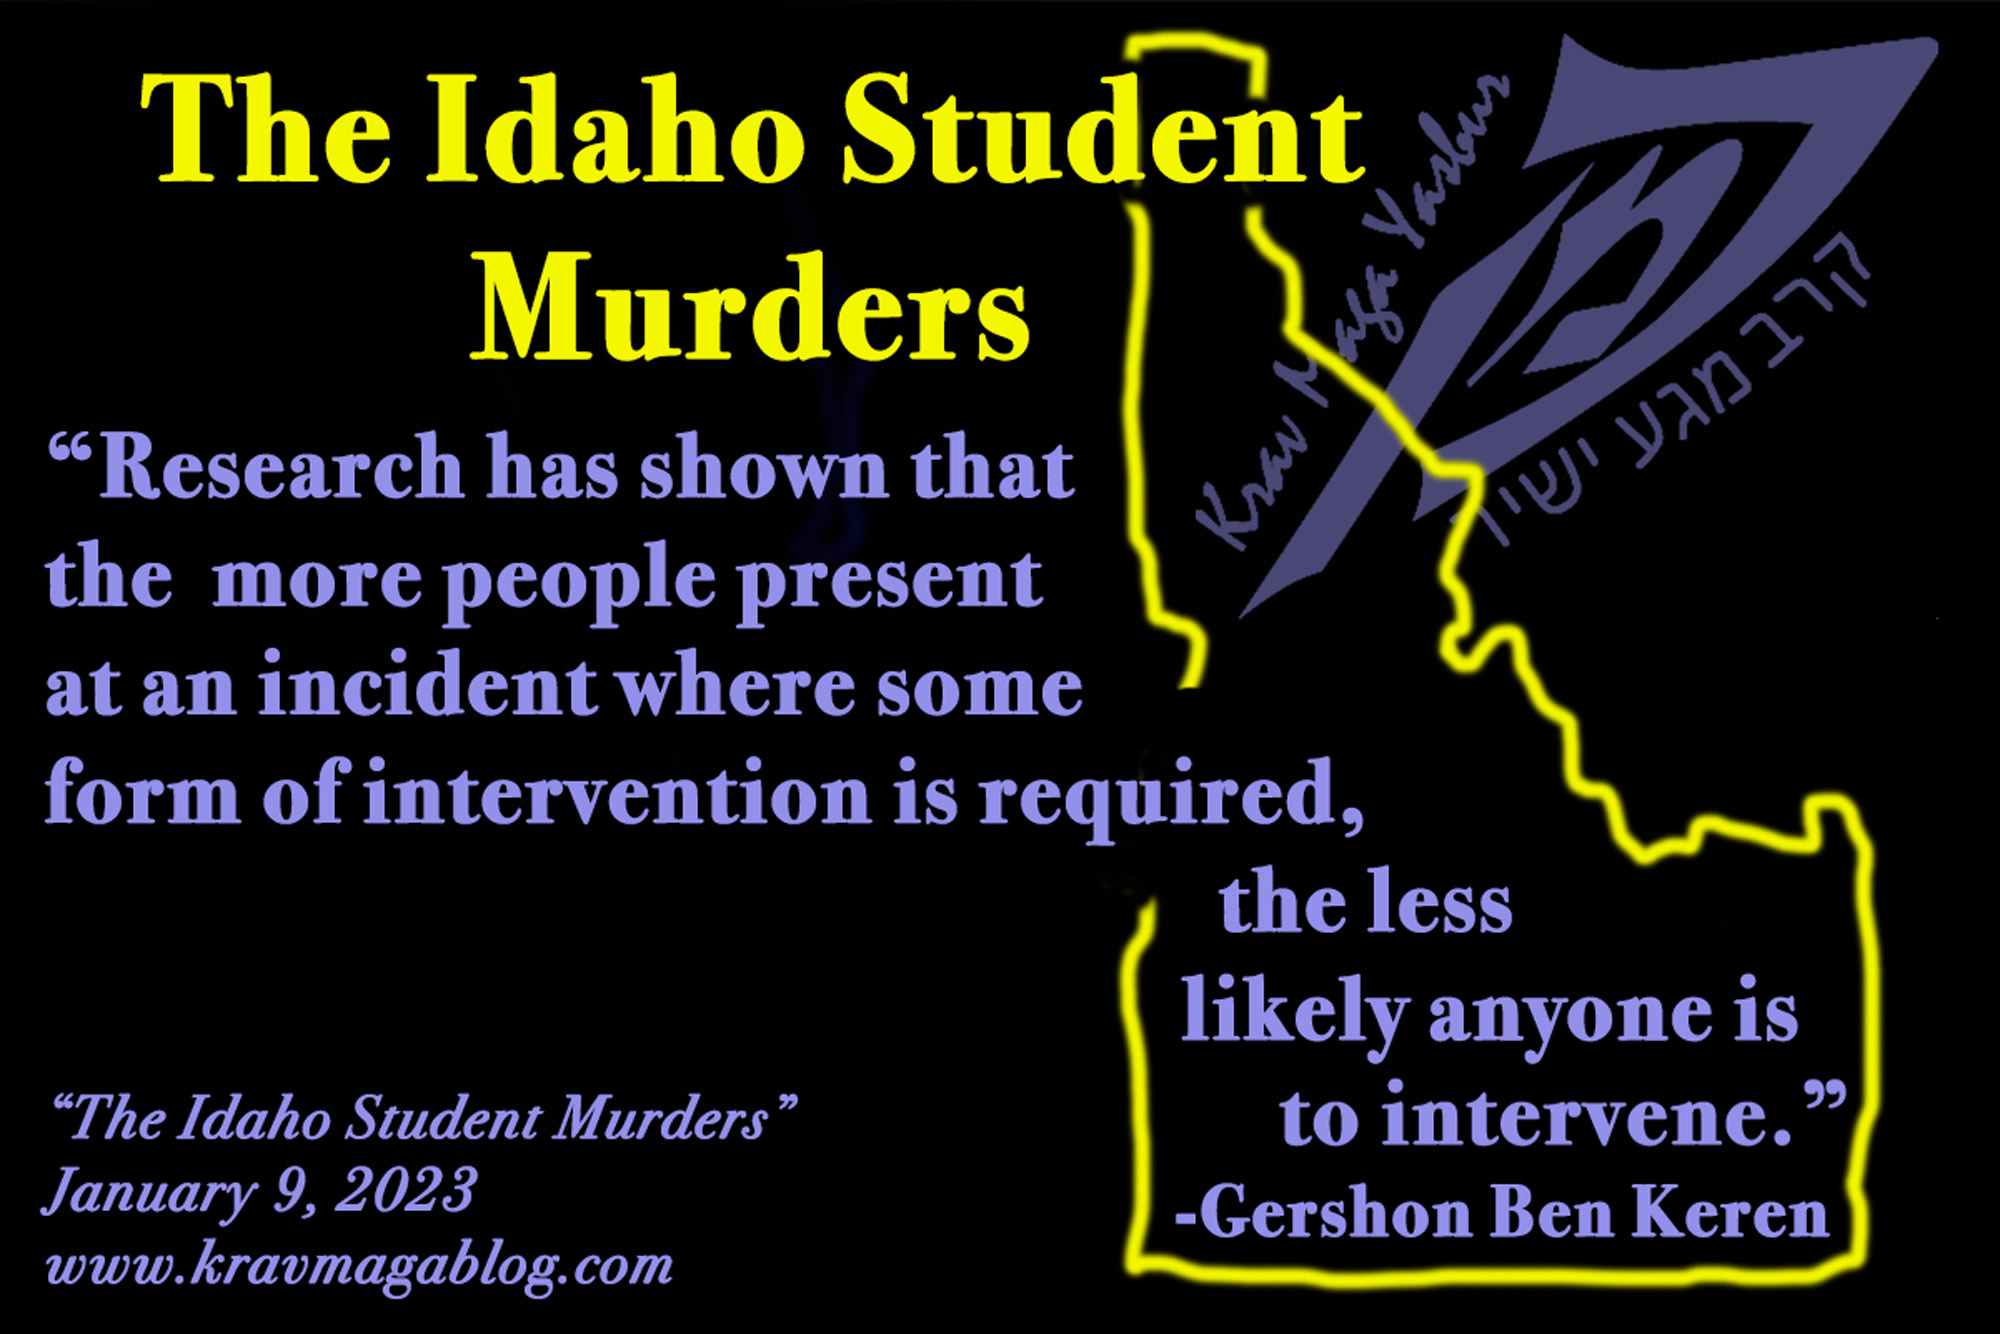 Blog About The Idaho Student Murders